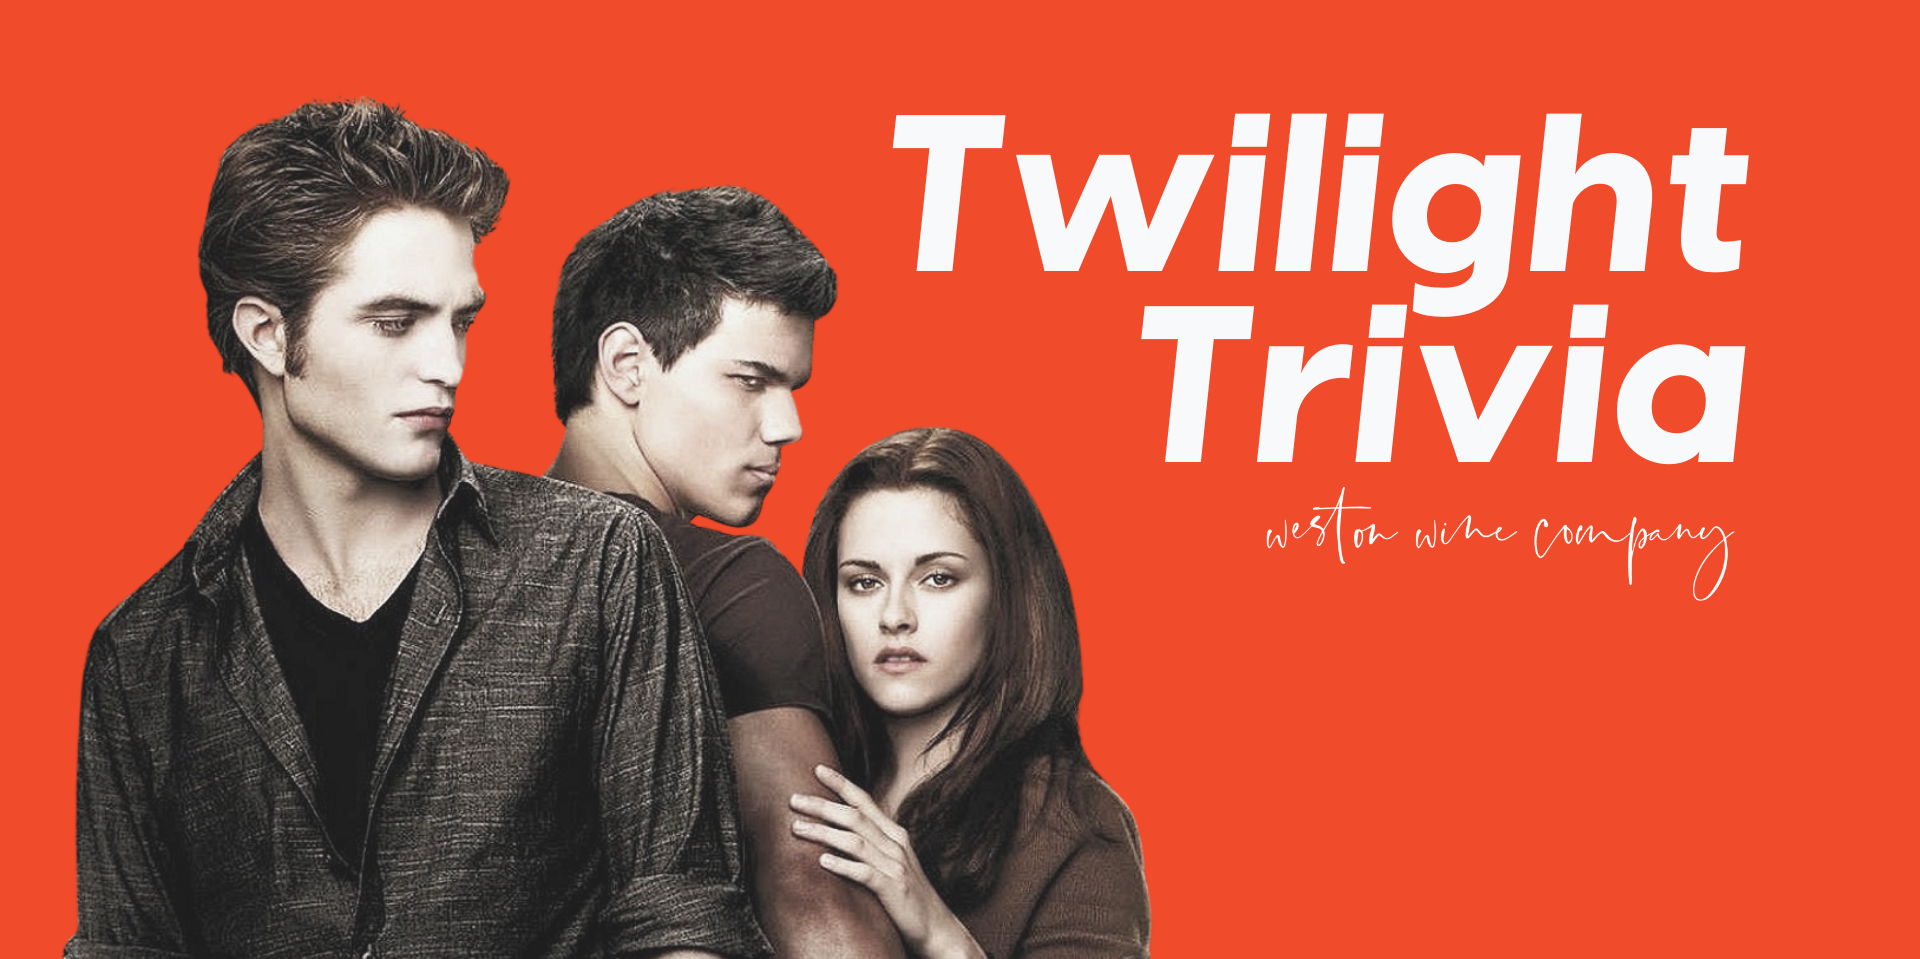 NEW QUESTIONS - Twilight Movie Trivia promotional image